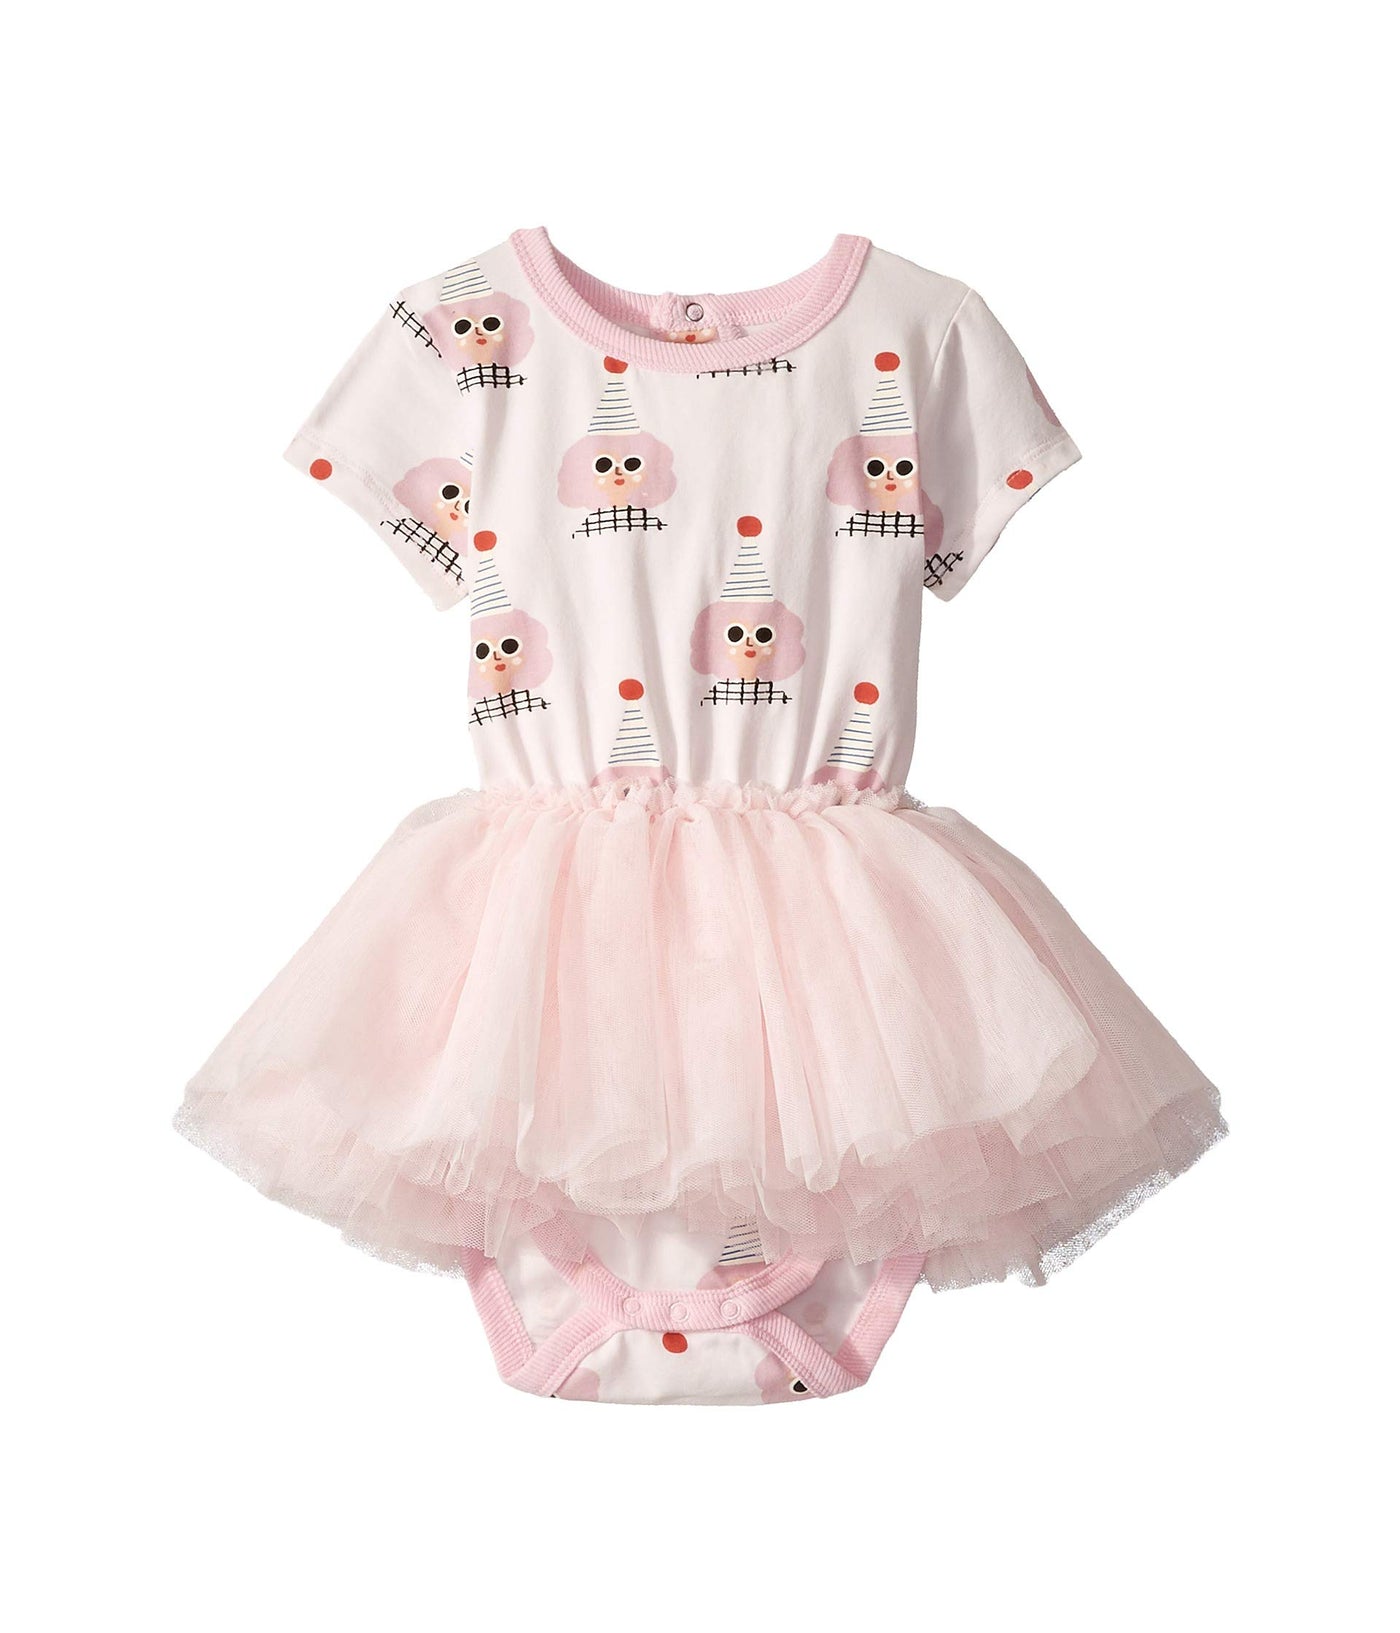 Rock Your Baby - Party Girl Circus Dress in Light Pink BGD1822U-PG